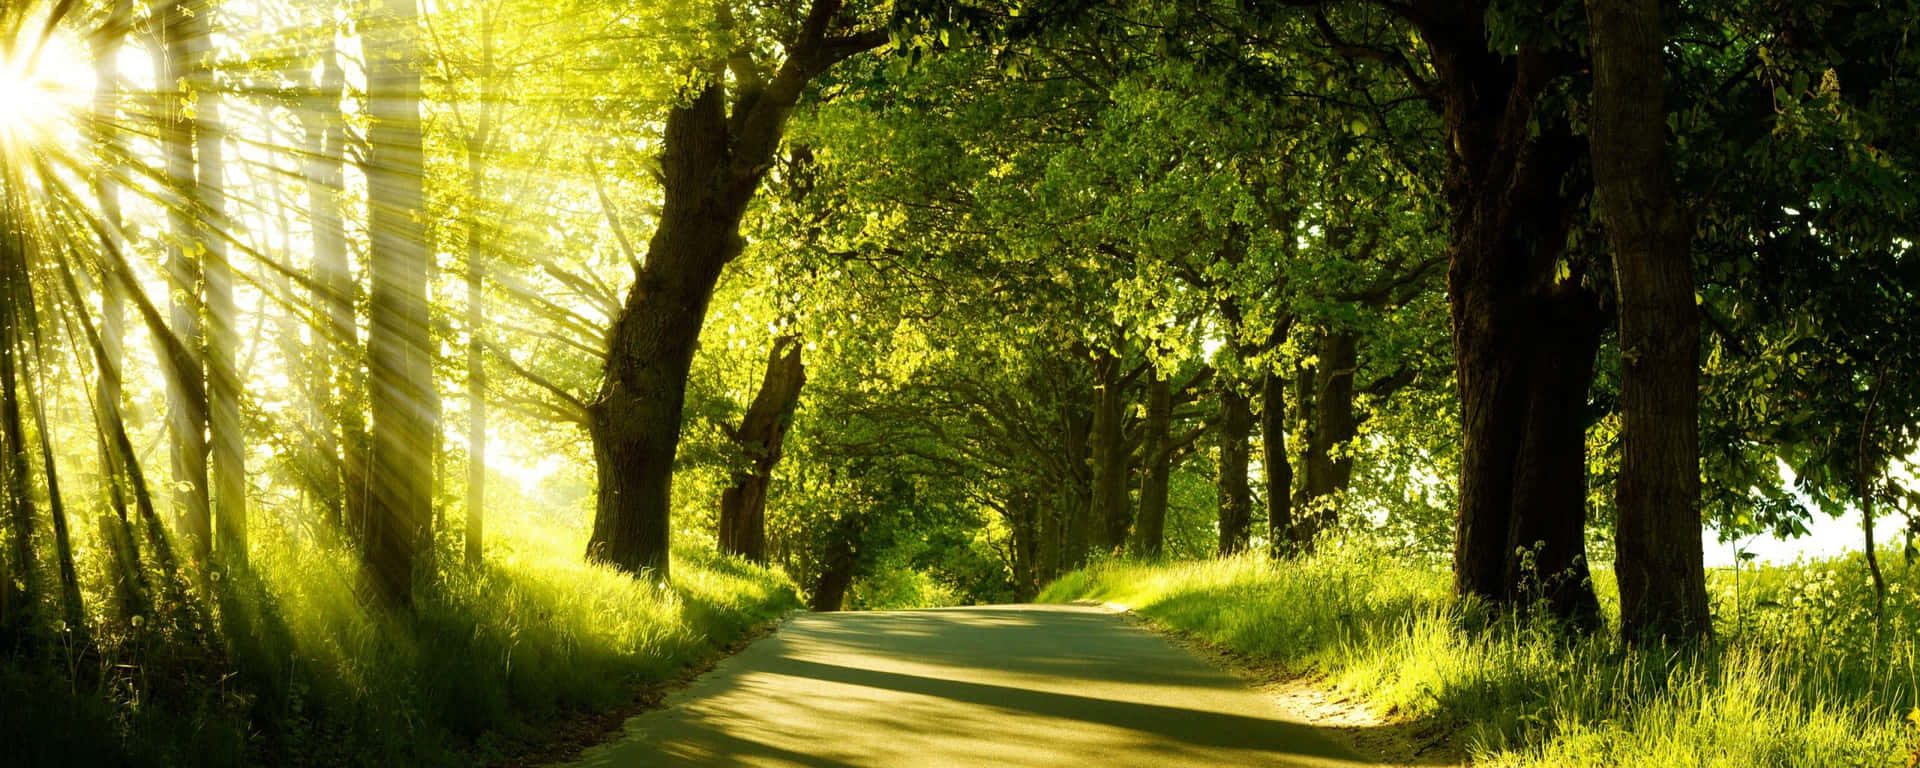 A Road With Trees And Sunlight Shining Through It Wallpaper